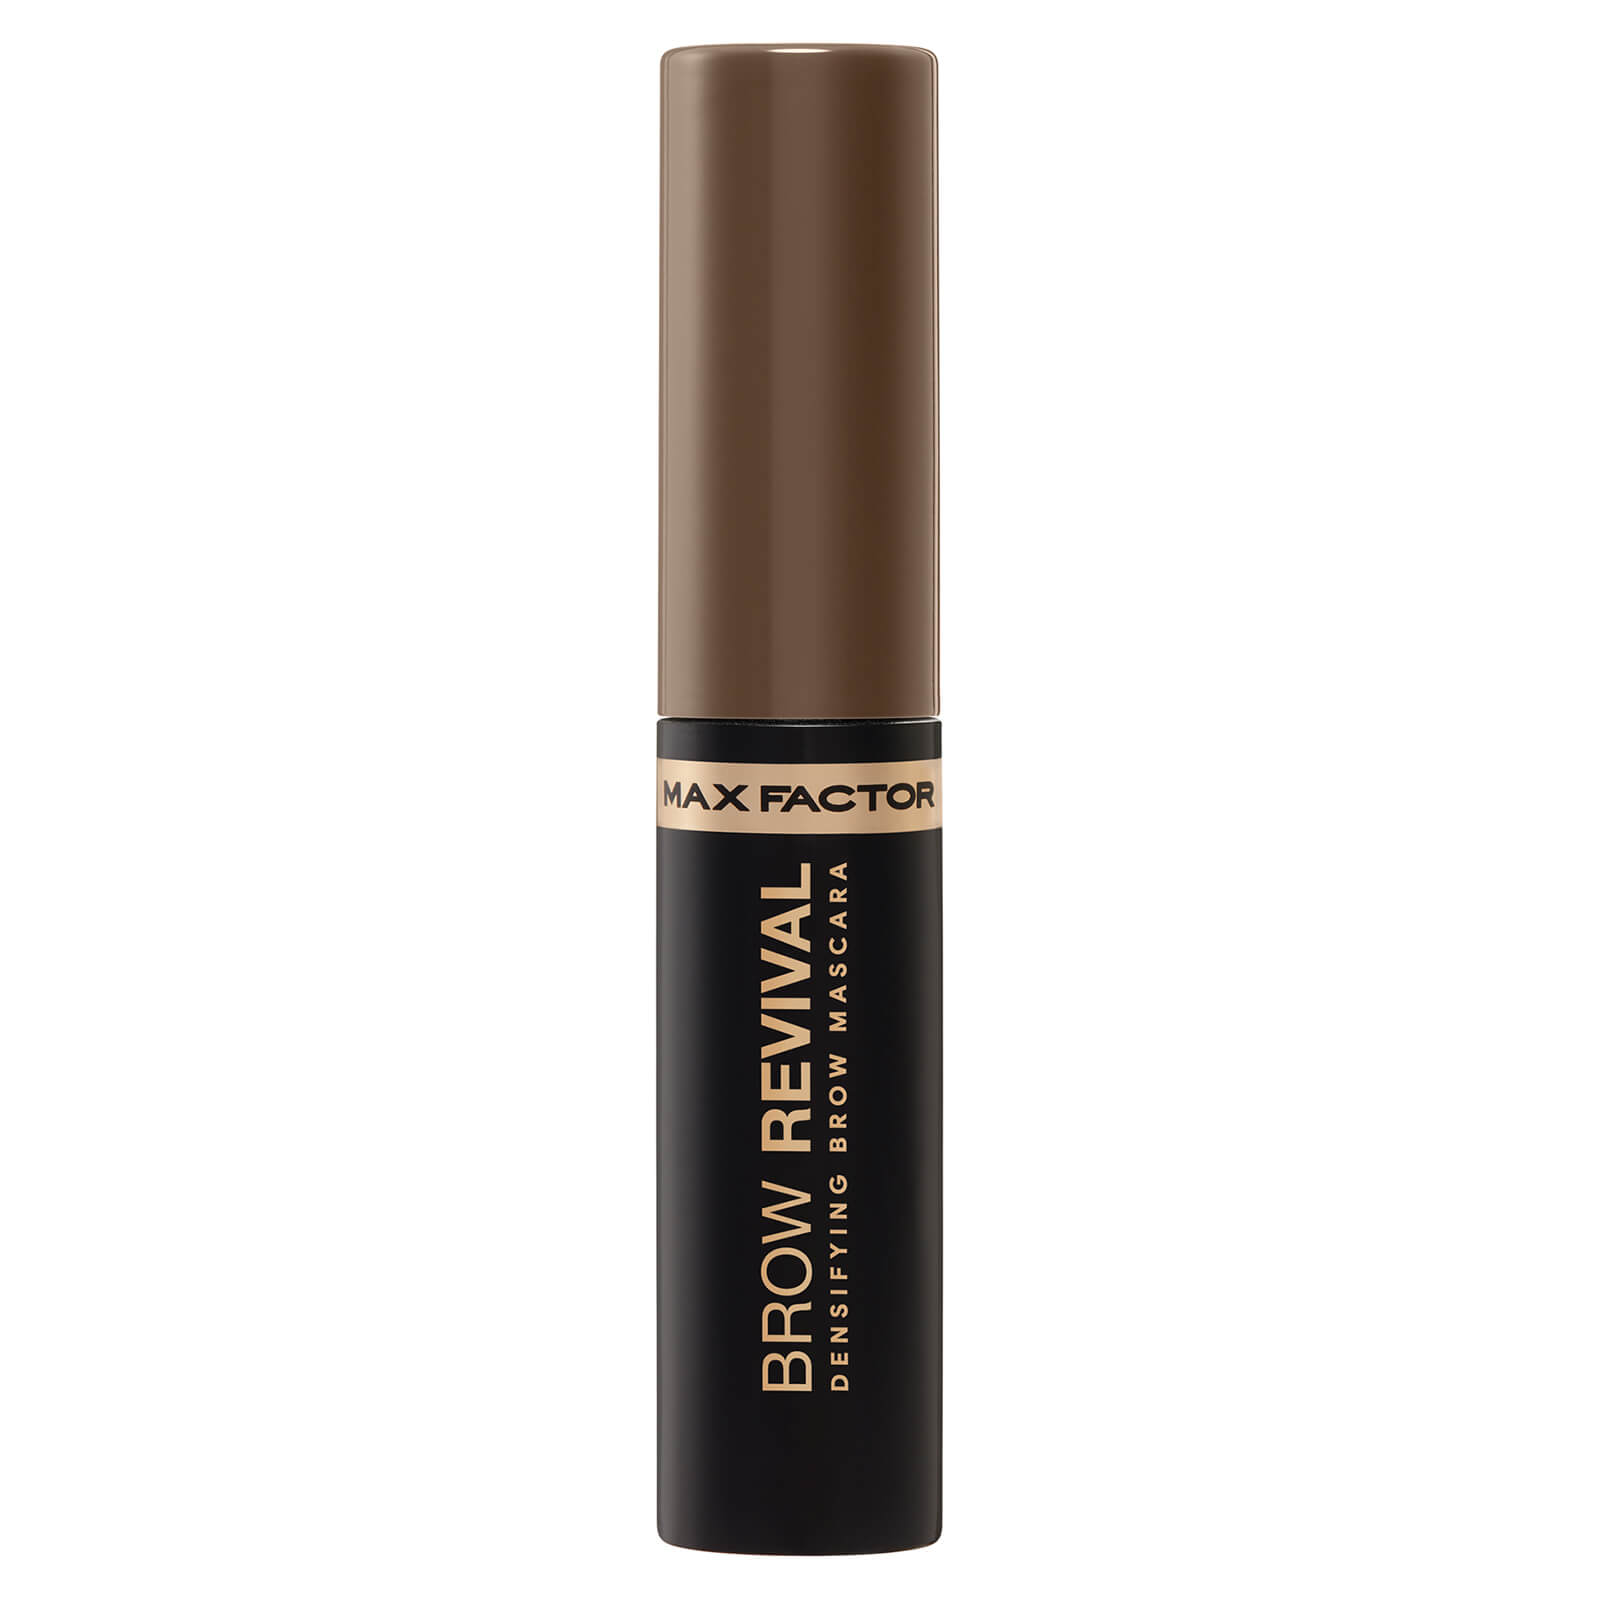 Max Factor Brow Revival Densifying Eyebrow Gel with Oils and Fibres 4.5g (Various Shades) - 3 002 Soft Brown